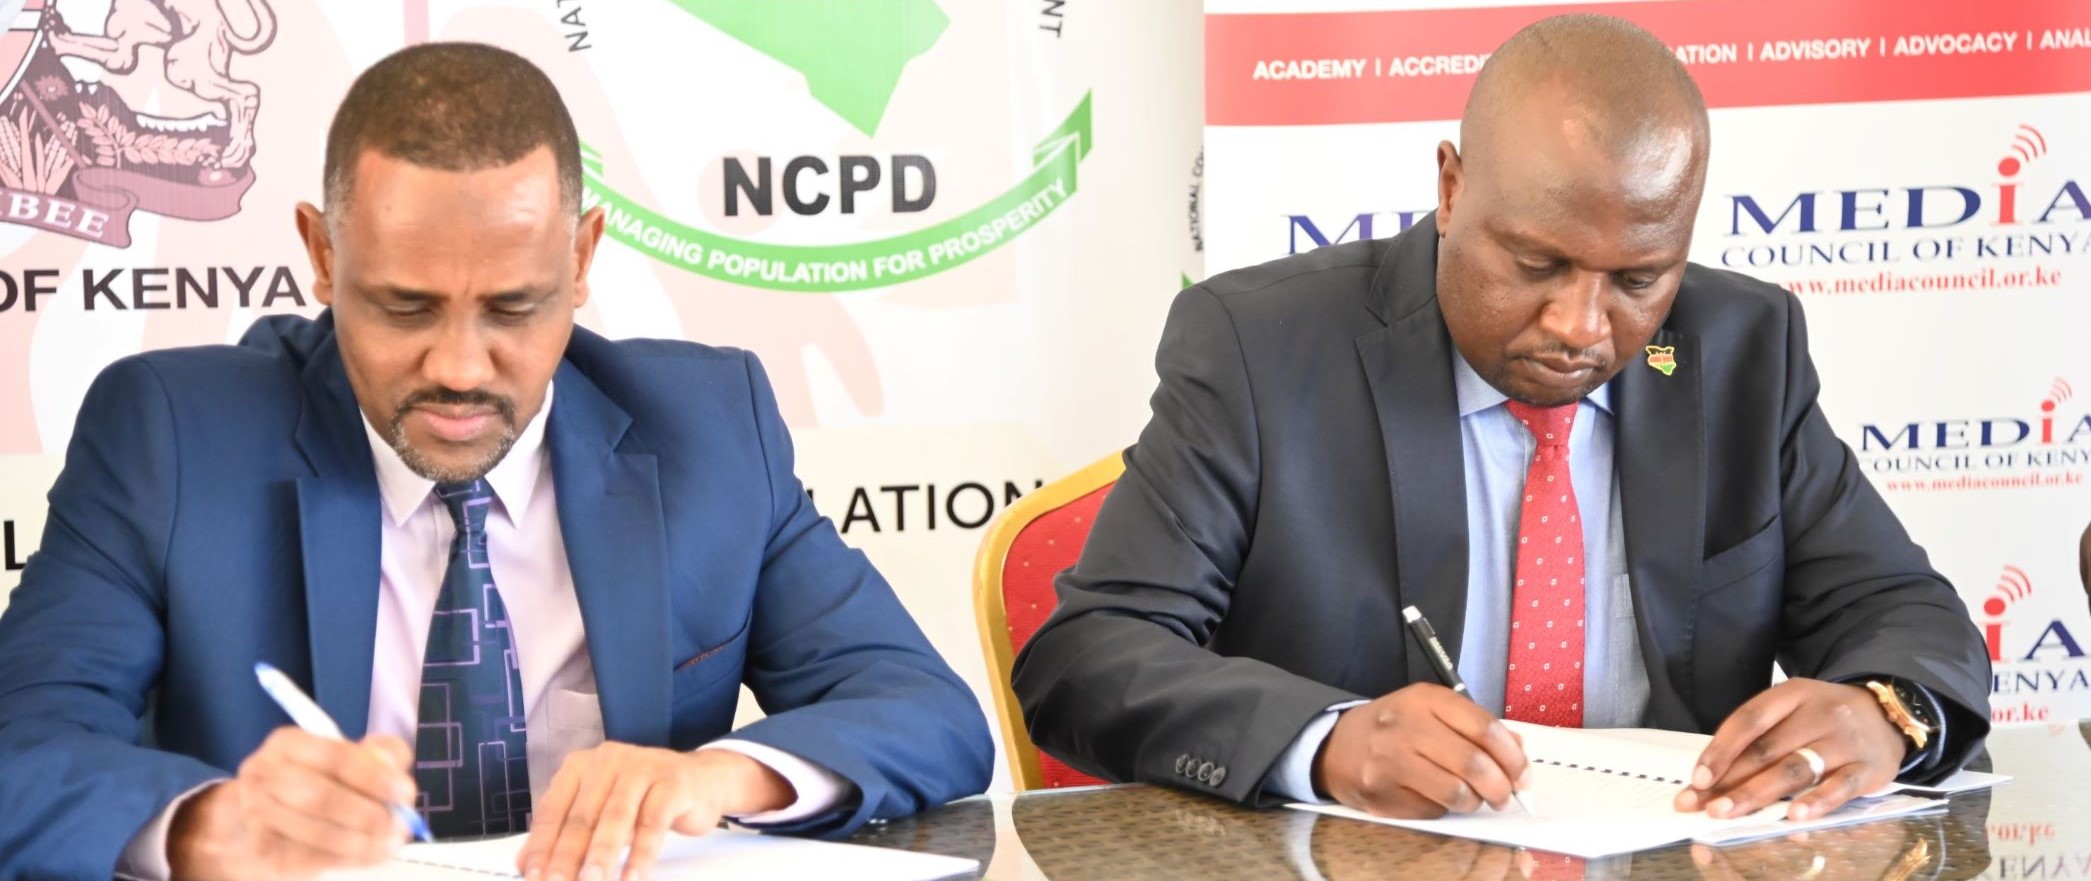 MCK Partners With NCPD To Sensitise Media on Population and Development